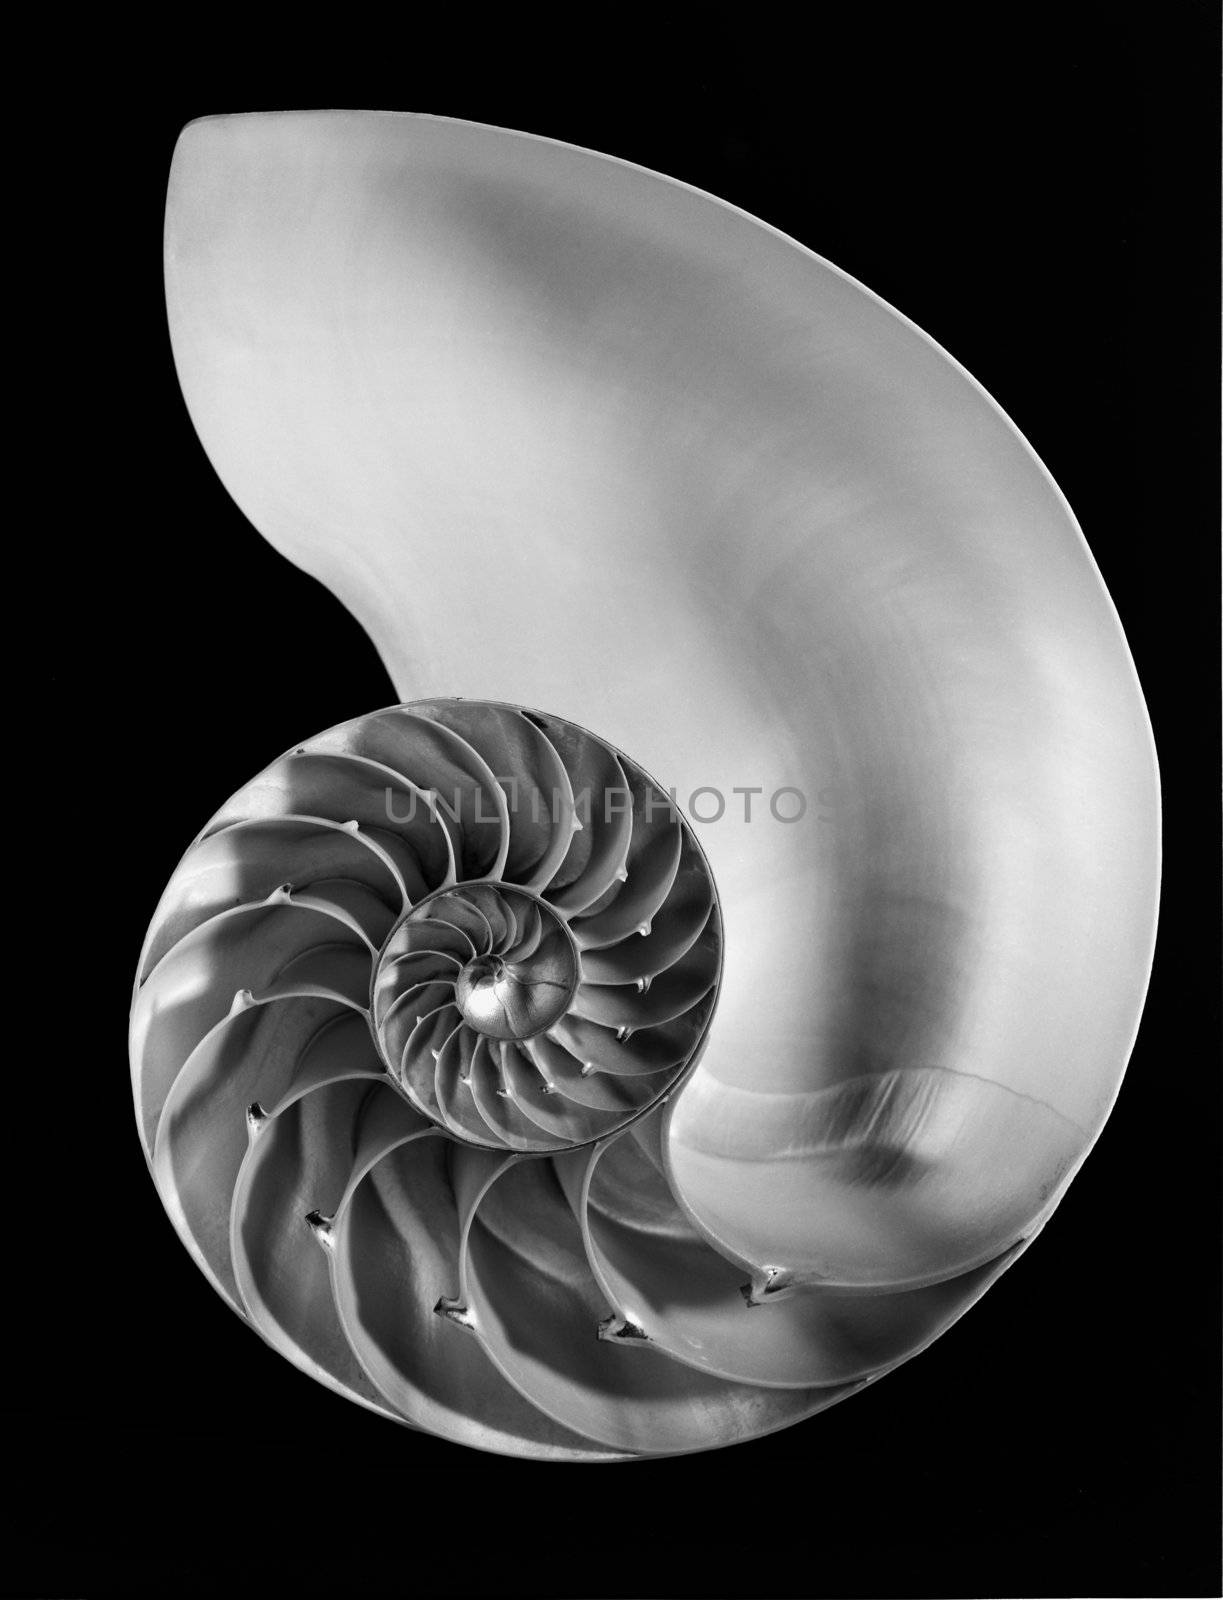 Nautilus shell by f/2sumicron